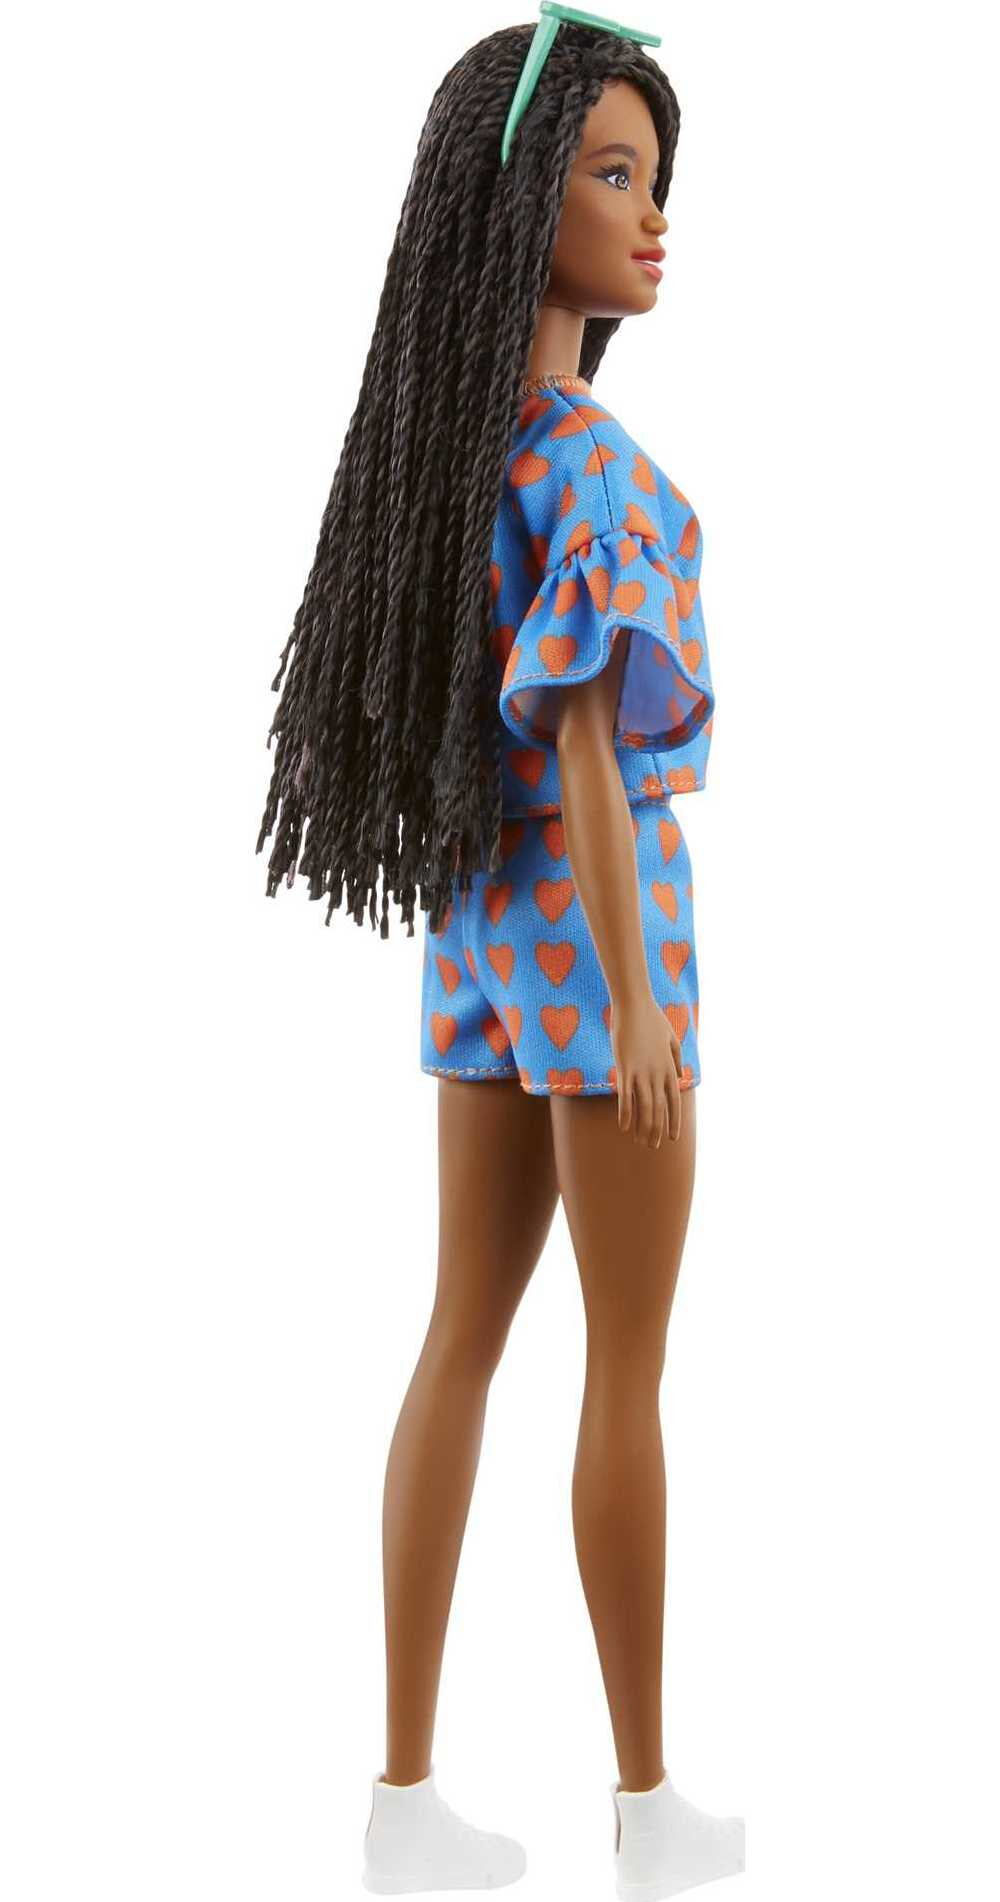 Barbie Fashionistas Doll #172 in Heart Print Shirt & Shorts with Braided Hair, Sneakers & Sunglasses - image 3 of 6